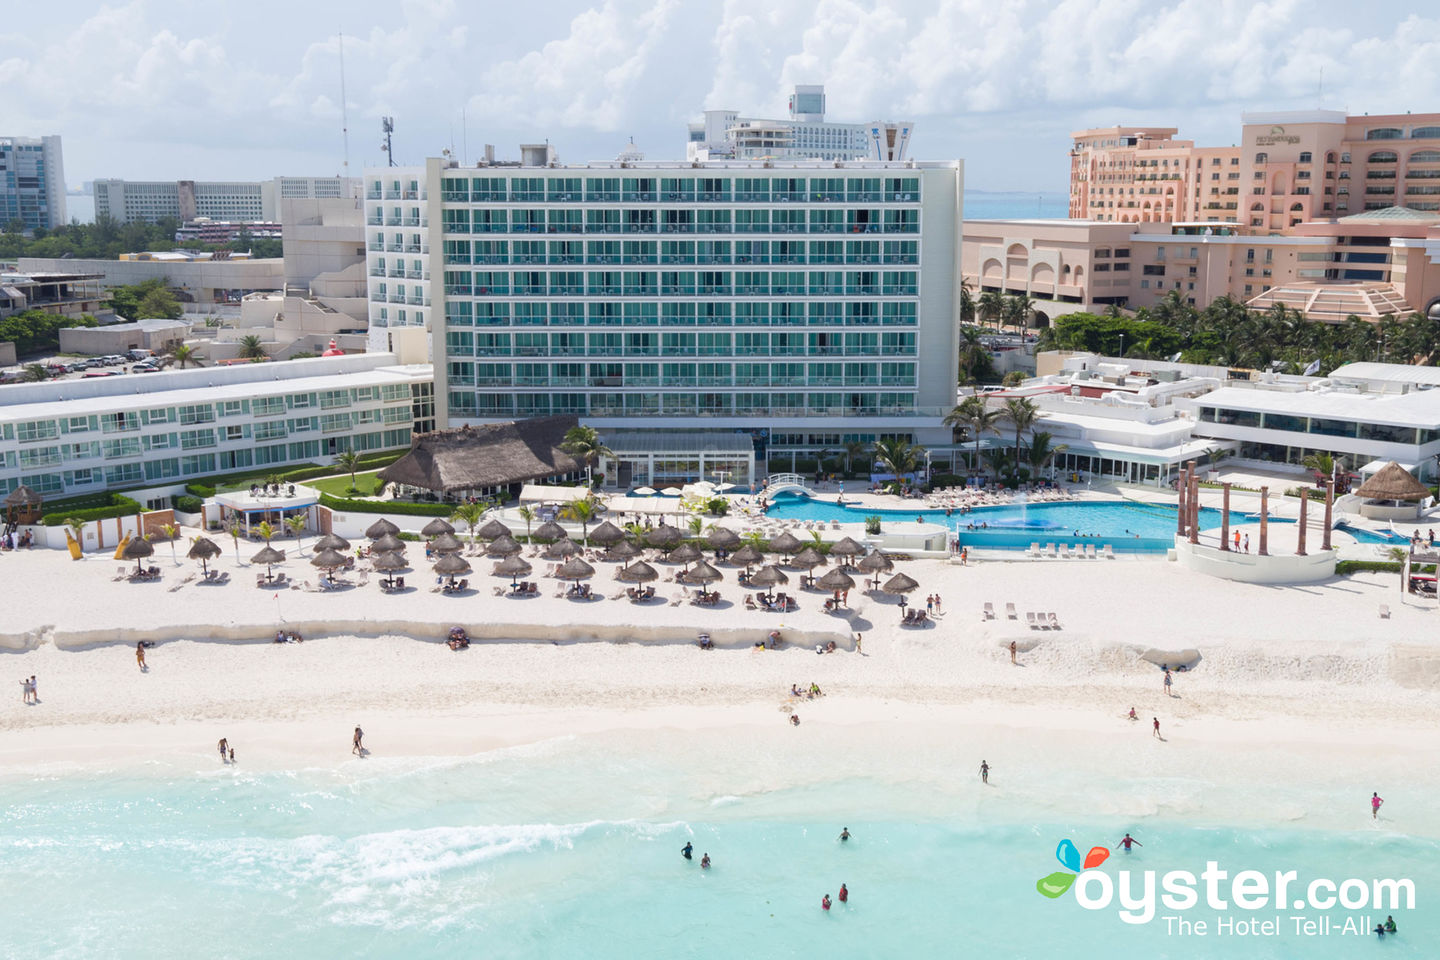 Krystal Cancun Review: What To REALLY Expect If You Stay